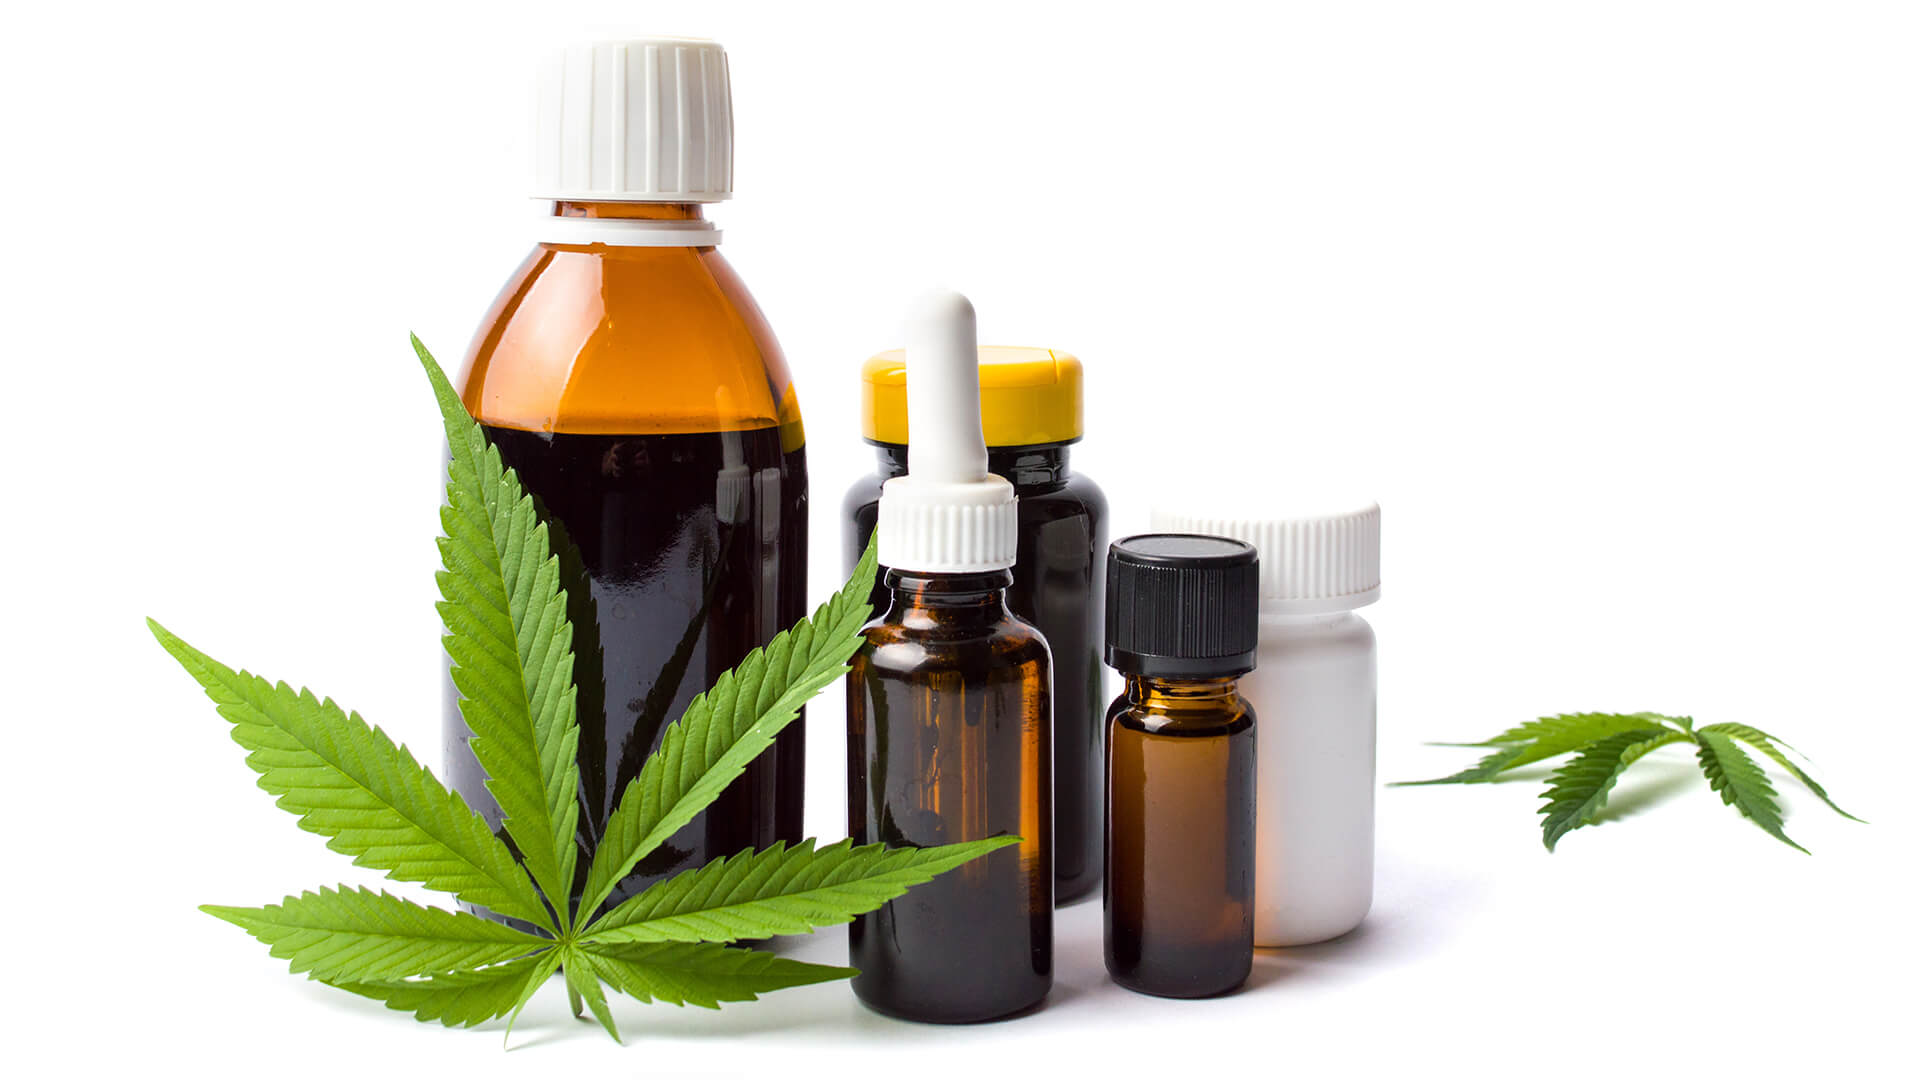 The Future of Medical Cannabis in Pain Management